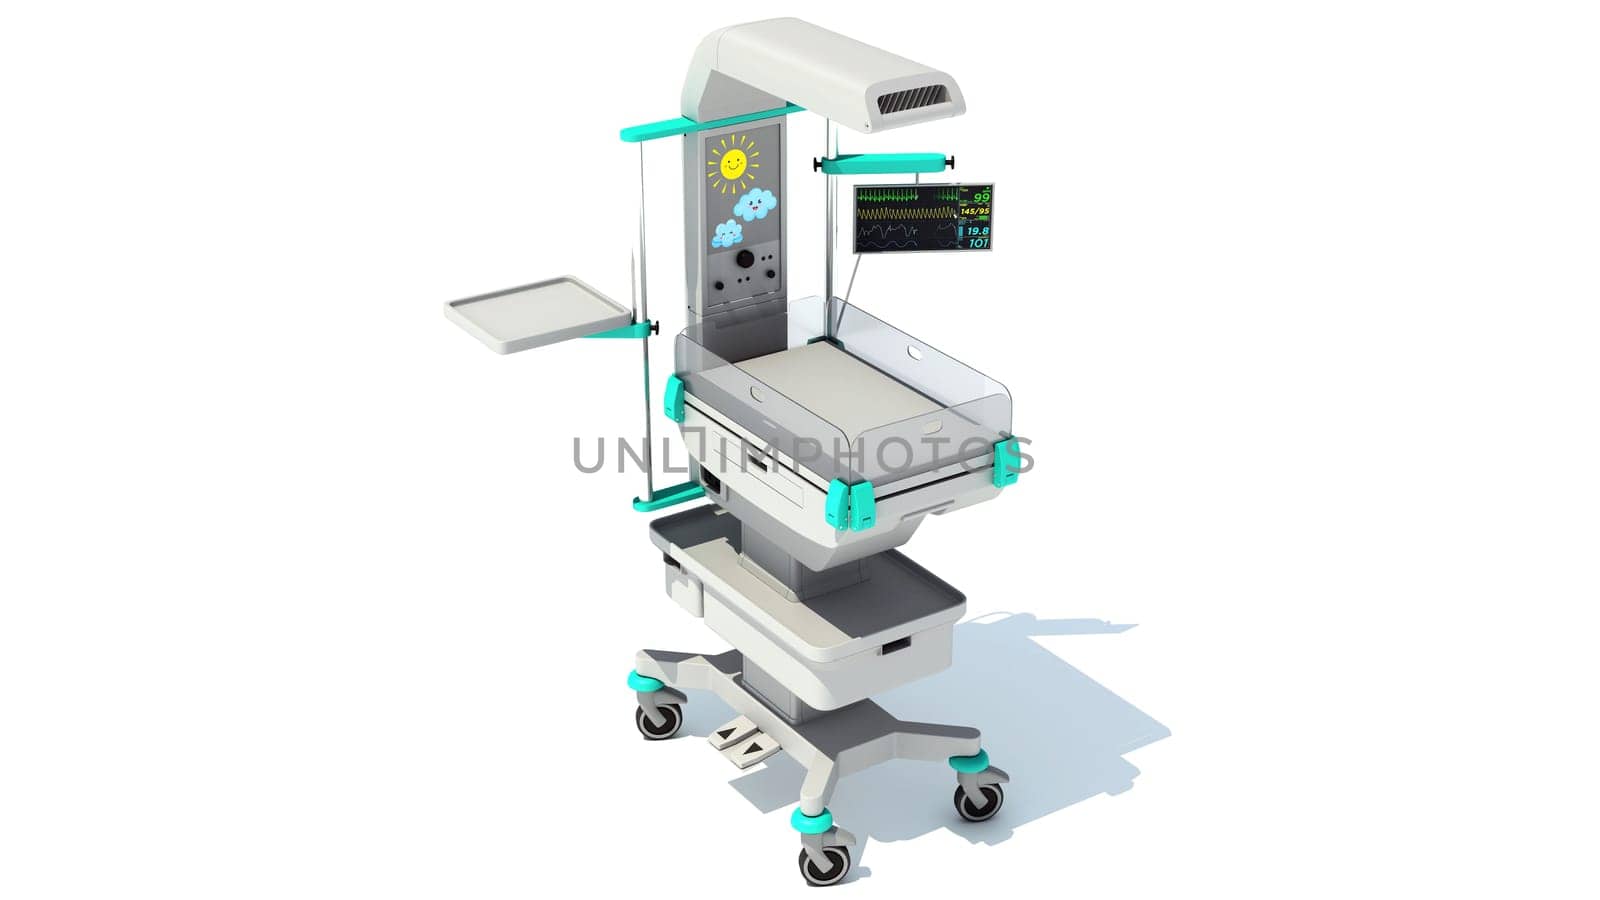 Anesthesia Respiratory Workstation Trolley medical equipment 3D rendering model on white background